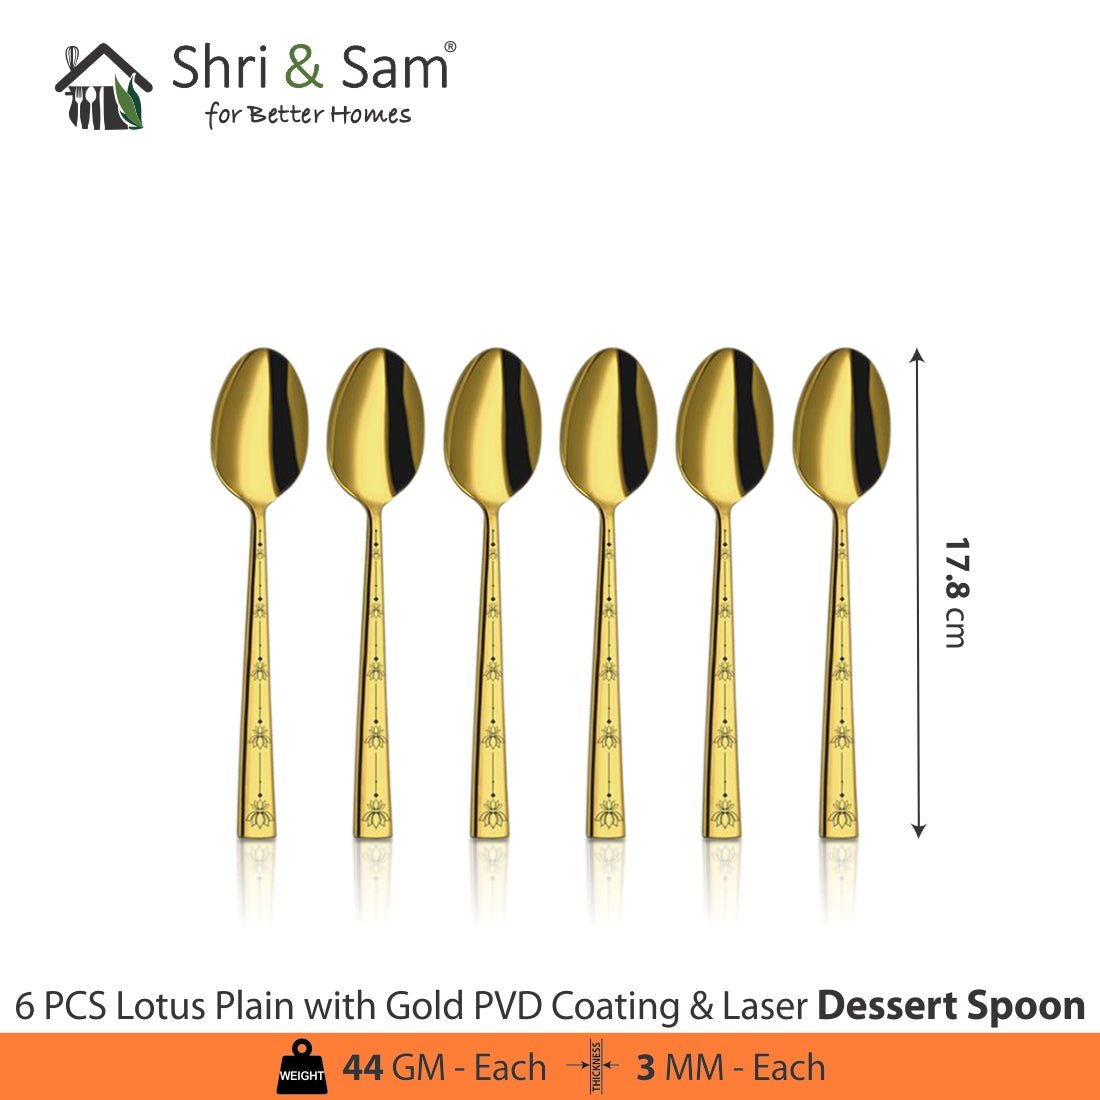 Stainless Steel Cutlery with Gold PVD Coating & Laser Lotus Plain